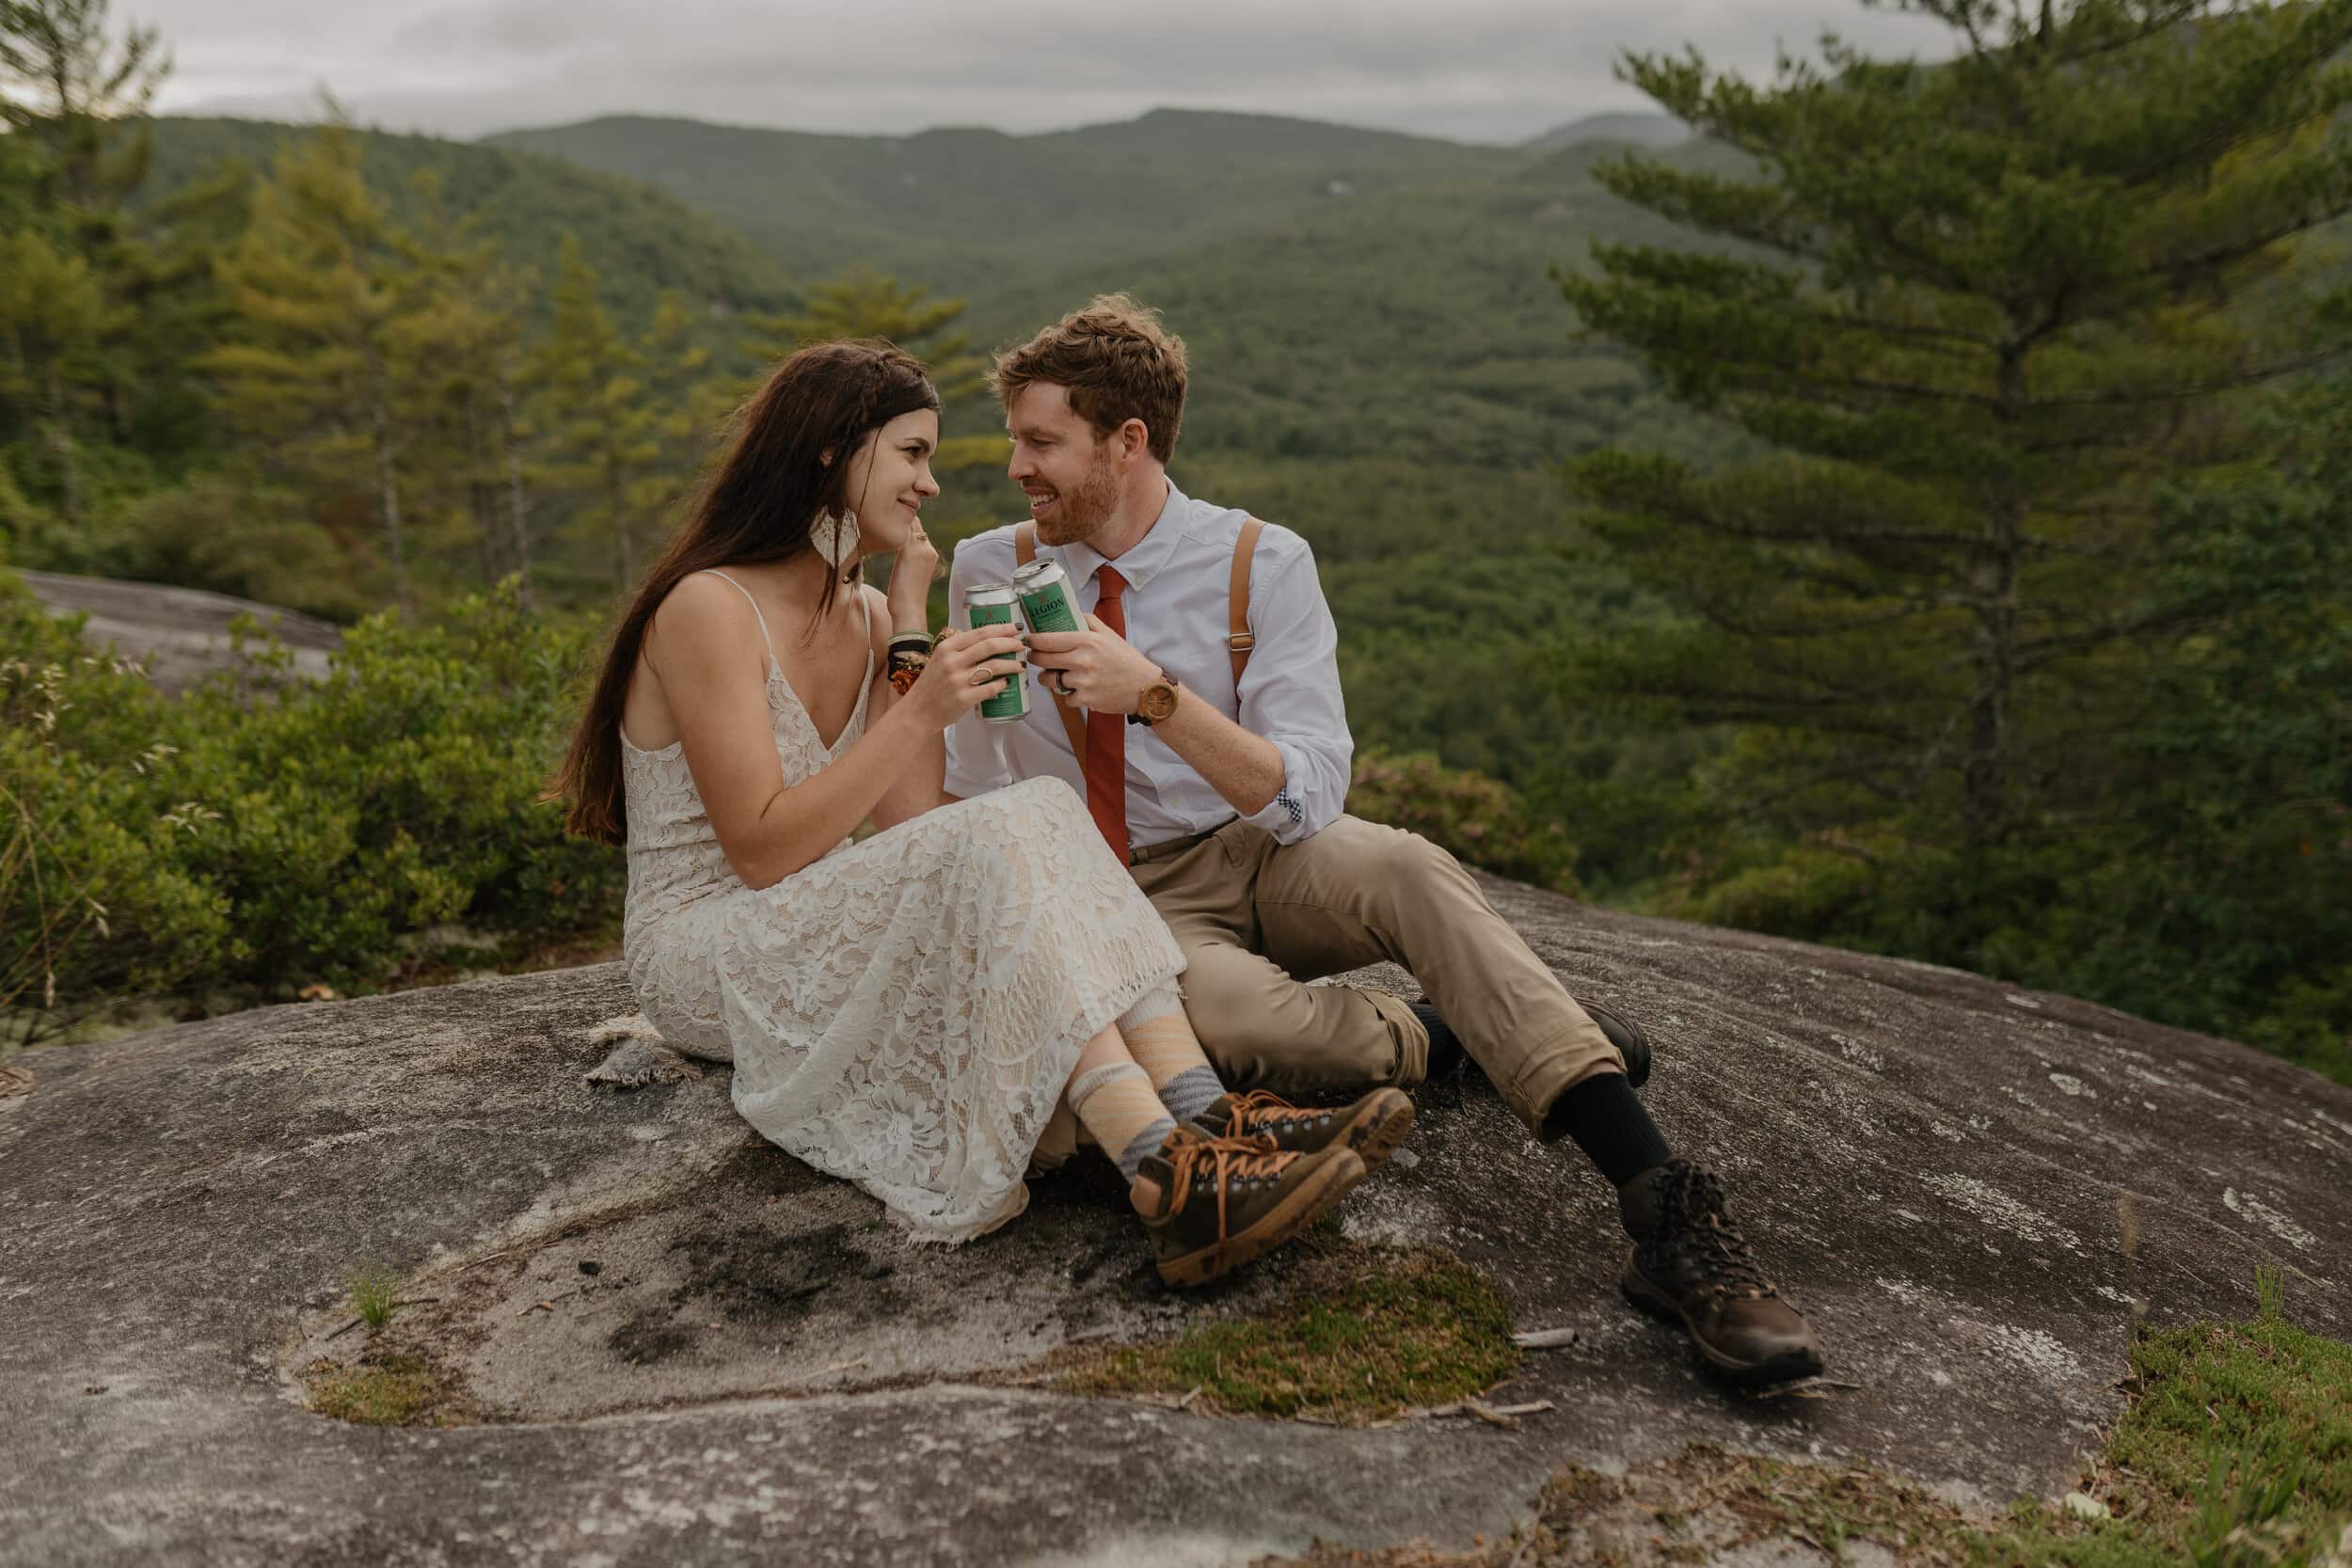 A couple is holding canned drinks, sitting on a rock while they elope in Asheville NC. The bride has long brown hair and hiking boots on with her dress. The groom has suspenders and a simple shirt and tie. They have a beautiful mountain backdrop behind them.